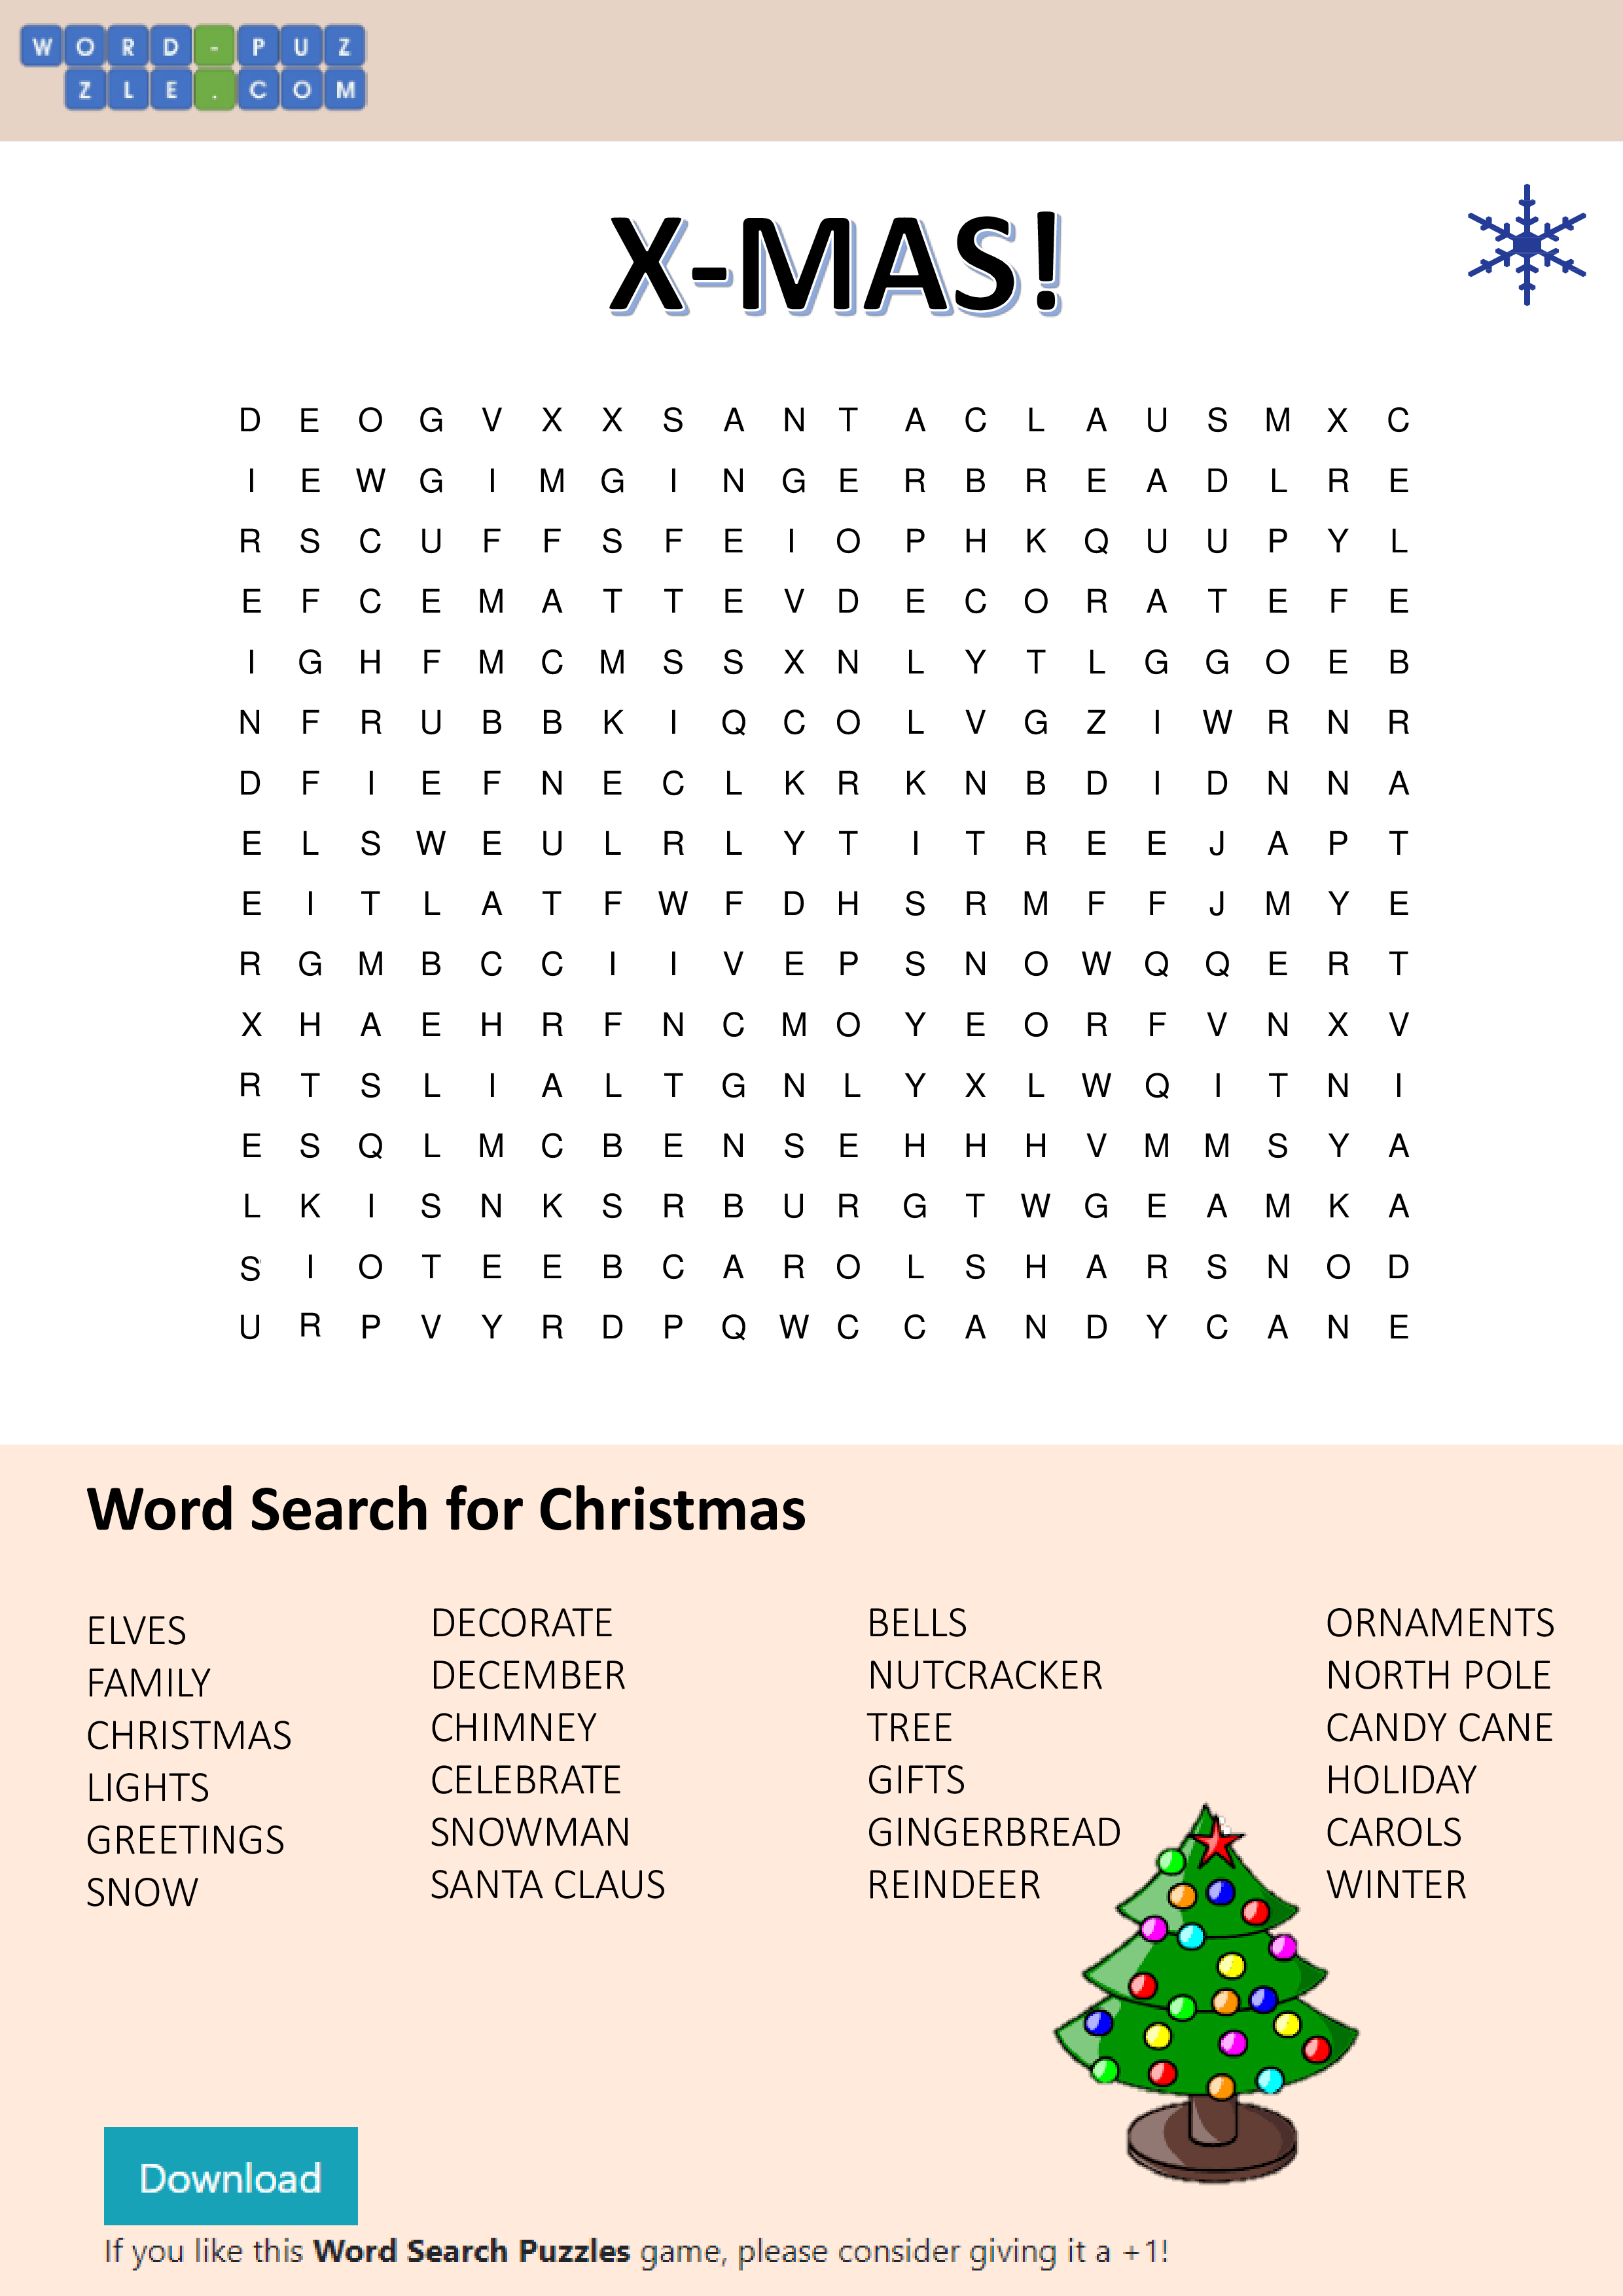 christmas word search templates at allbusinesstemplates com